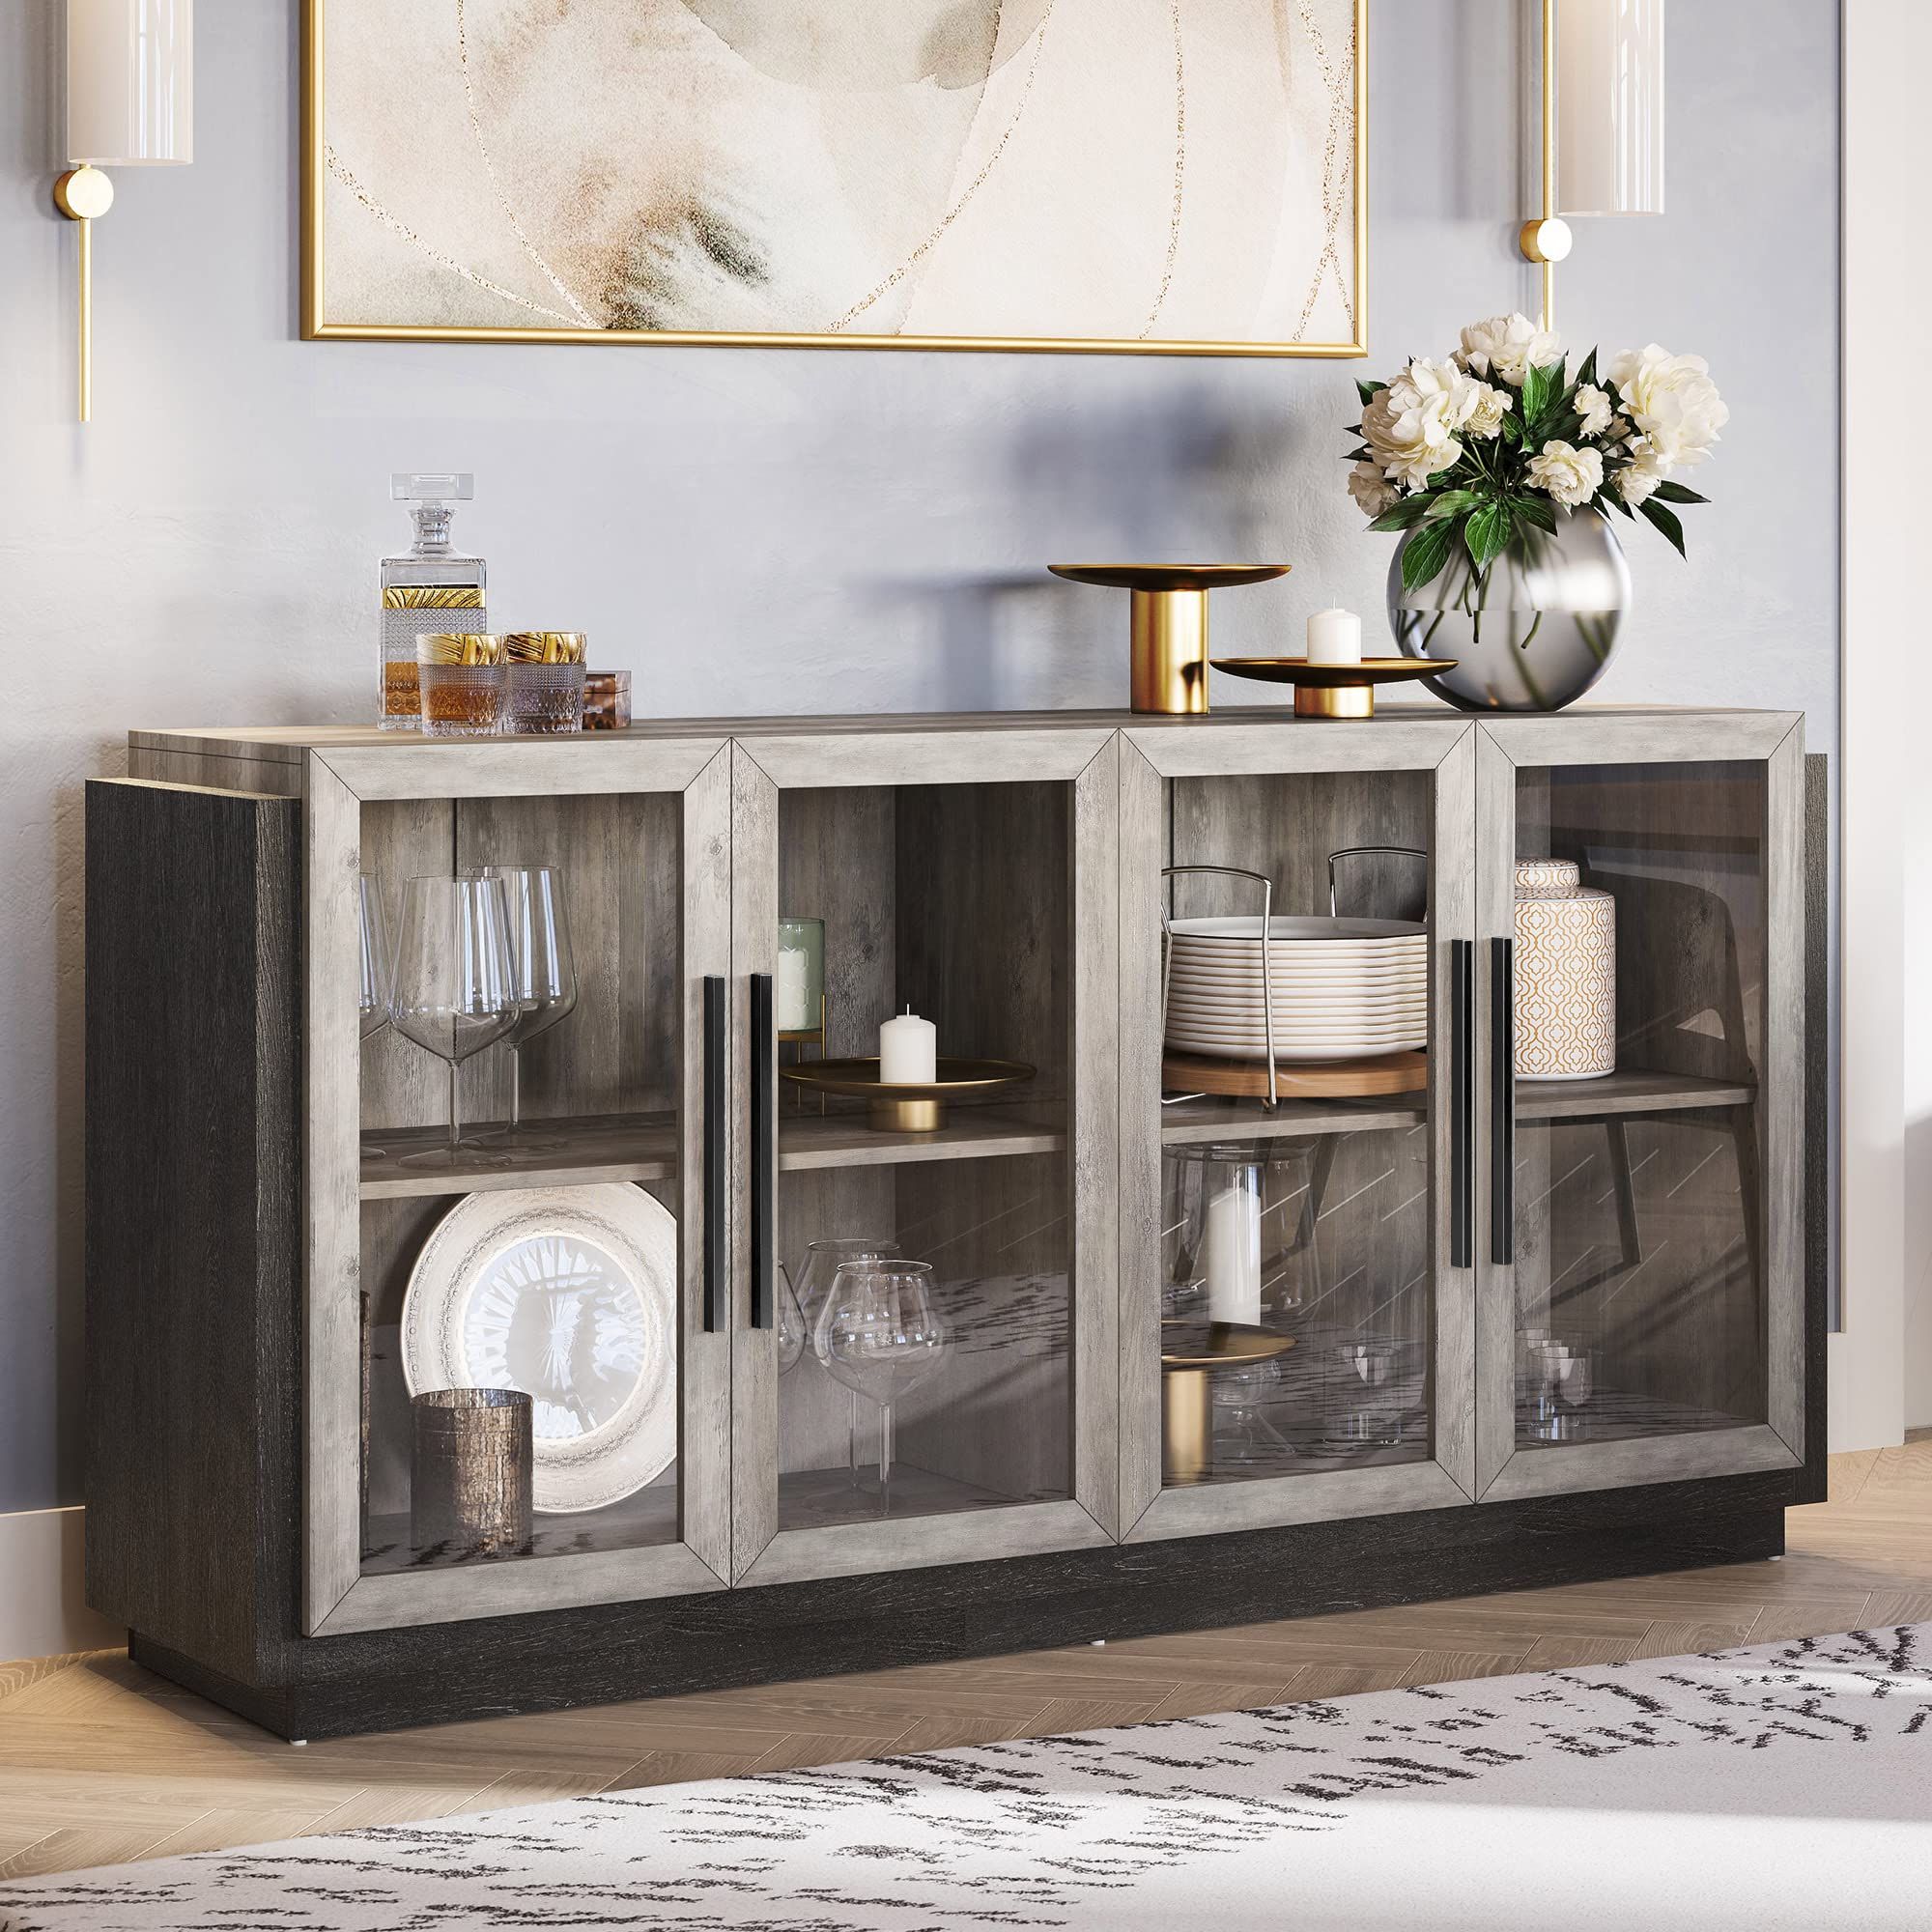 Sideboard Buffet Cabinets Intended For Most Up To Date Amazon: Belleze Sideboard Buffet Cabinet, Modern Wood Glass  Buffet Sideboard With Storage, Console Table For Kitchen, Dining Room,  Living Room, Hallway, Or Entrance – Brixston (grey) : Home & Kitchen (Photo 2 of 10)